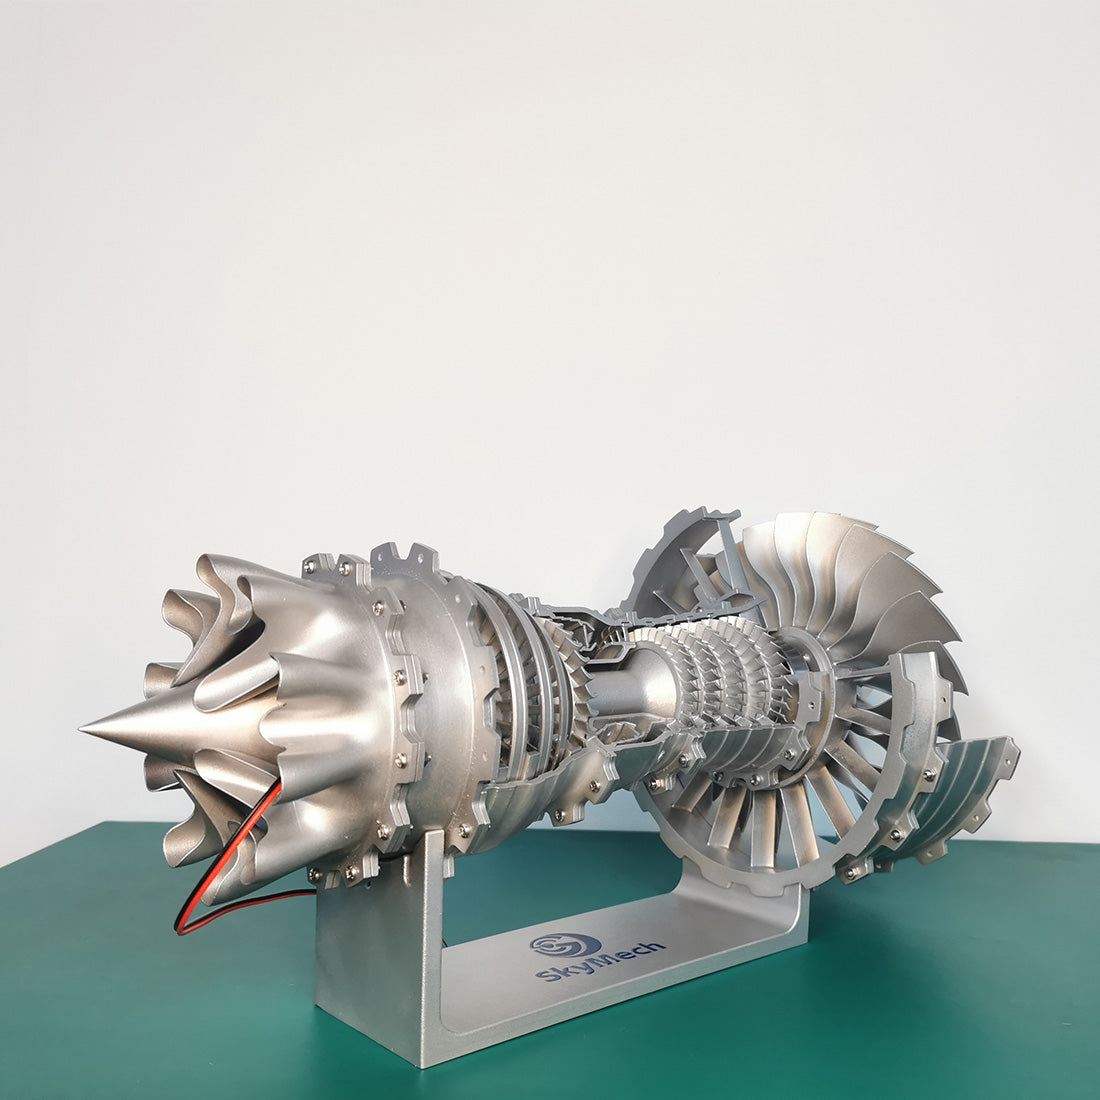 trent 900 working turbofan engine model kit build your own jet engine that works aircraft skymech